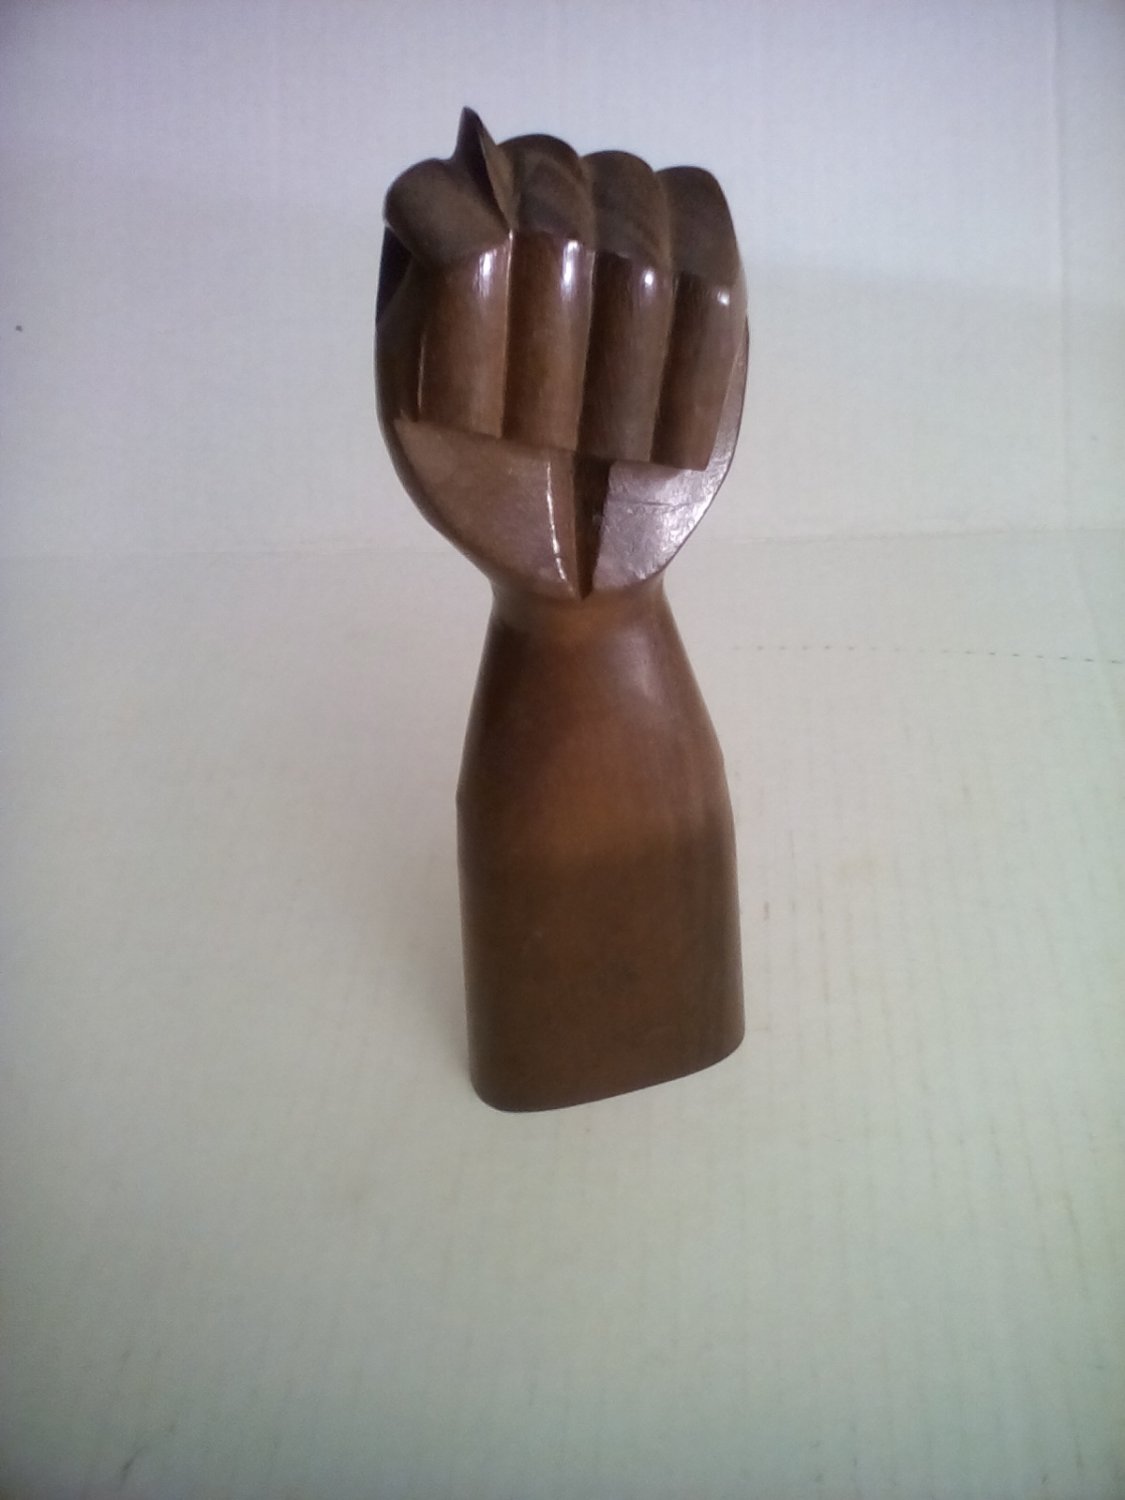 Vintage 1970s Mano Fico Carved Art Carving Statue Hand